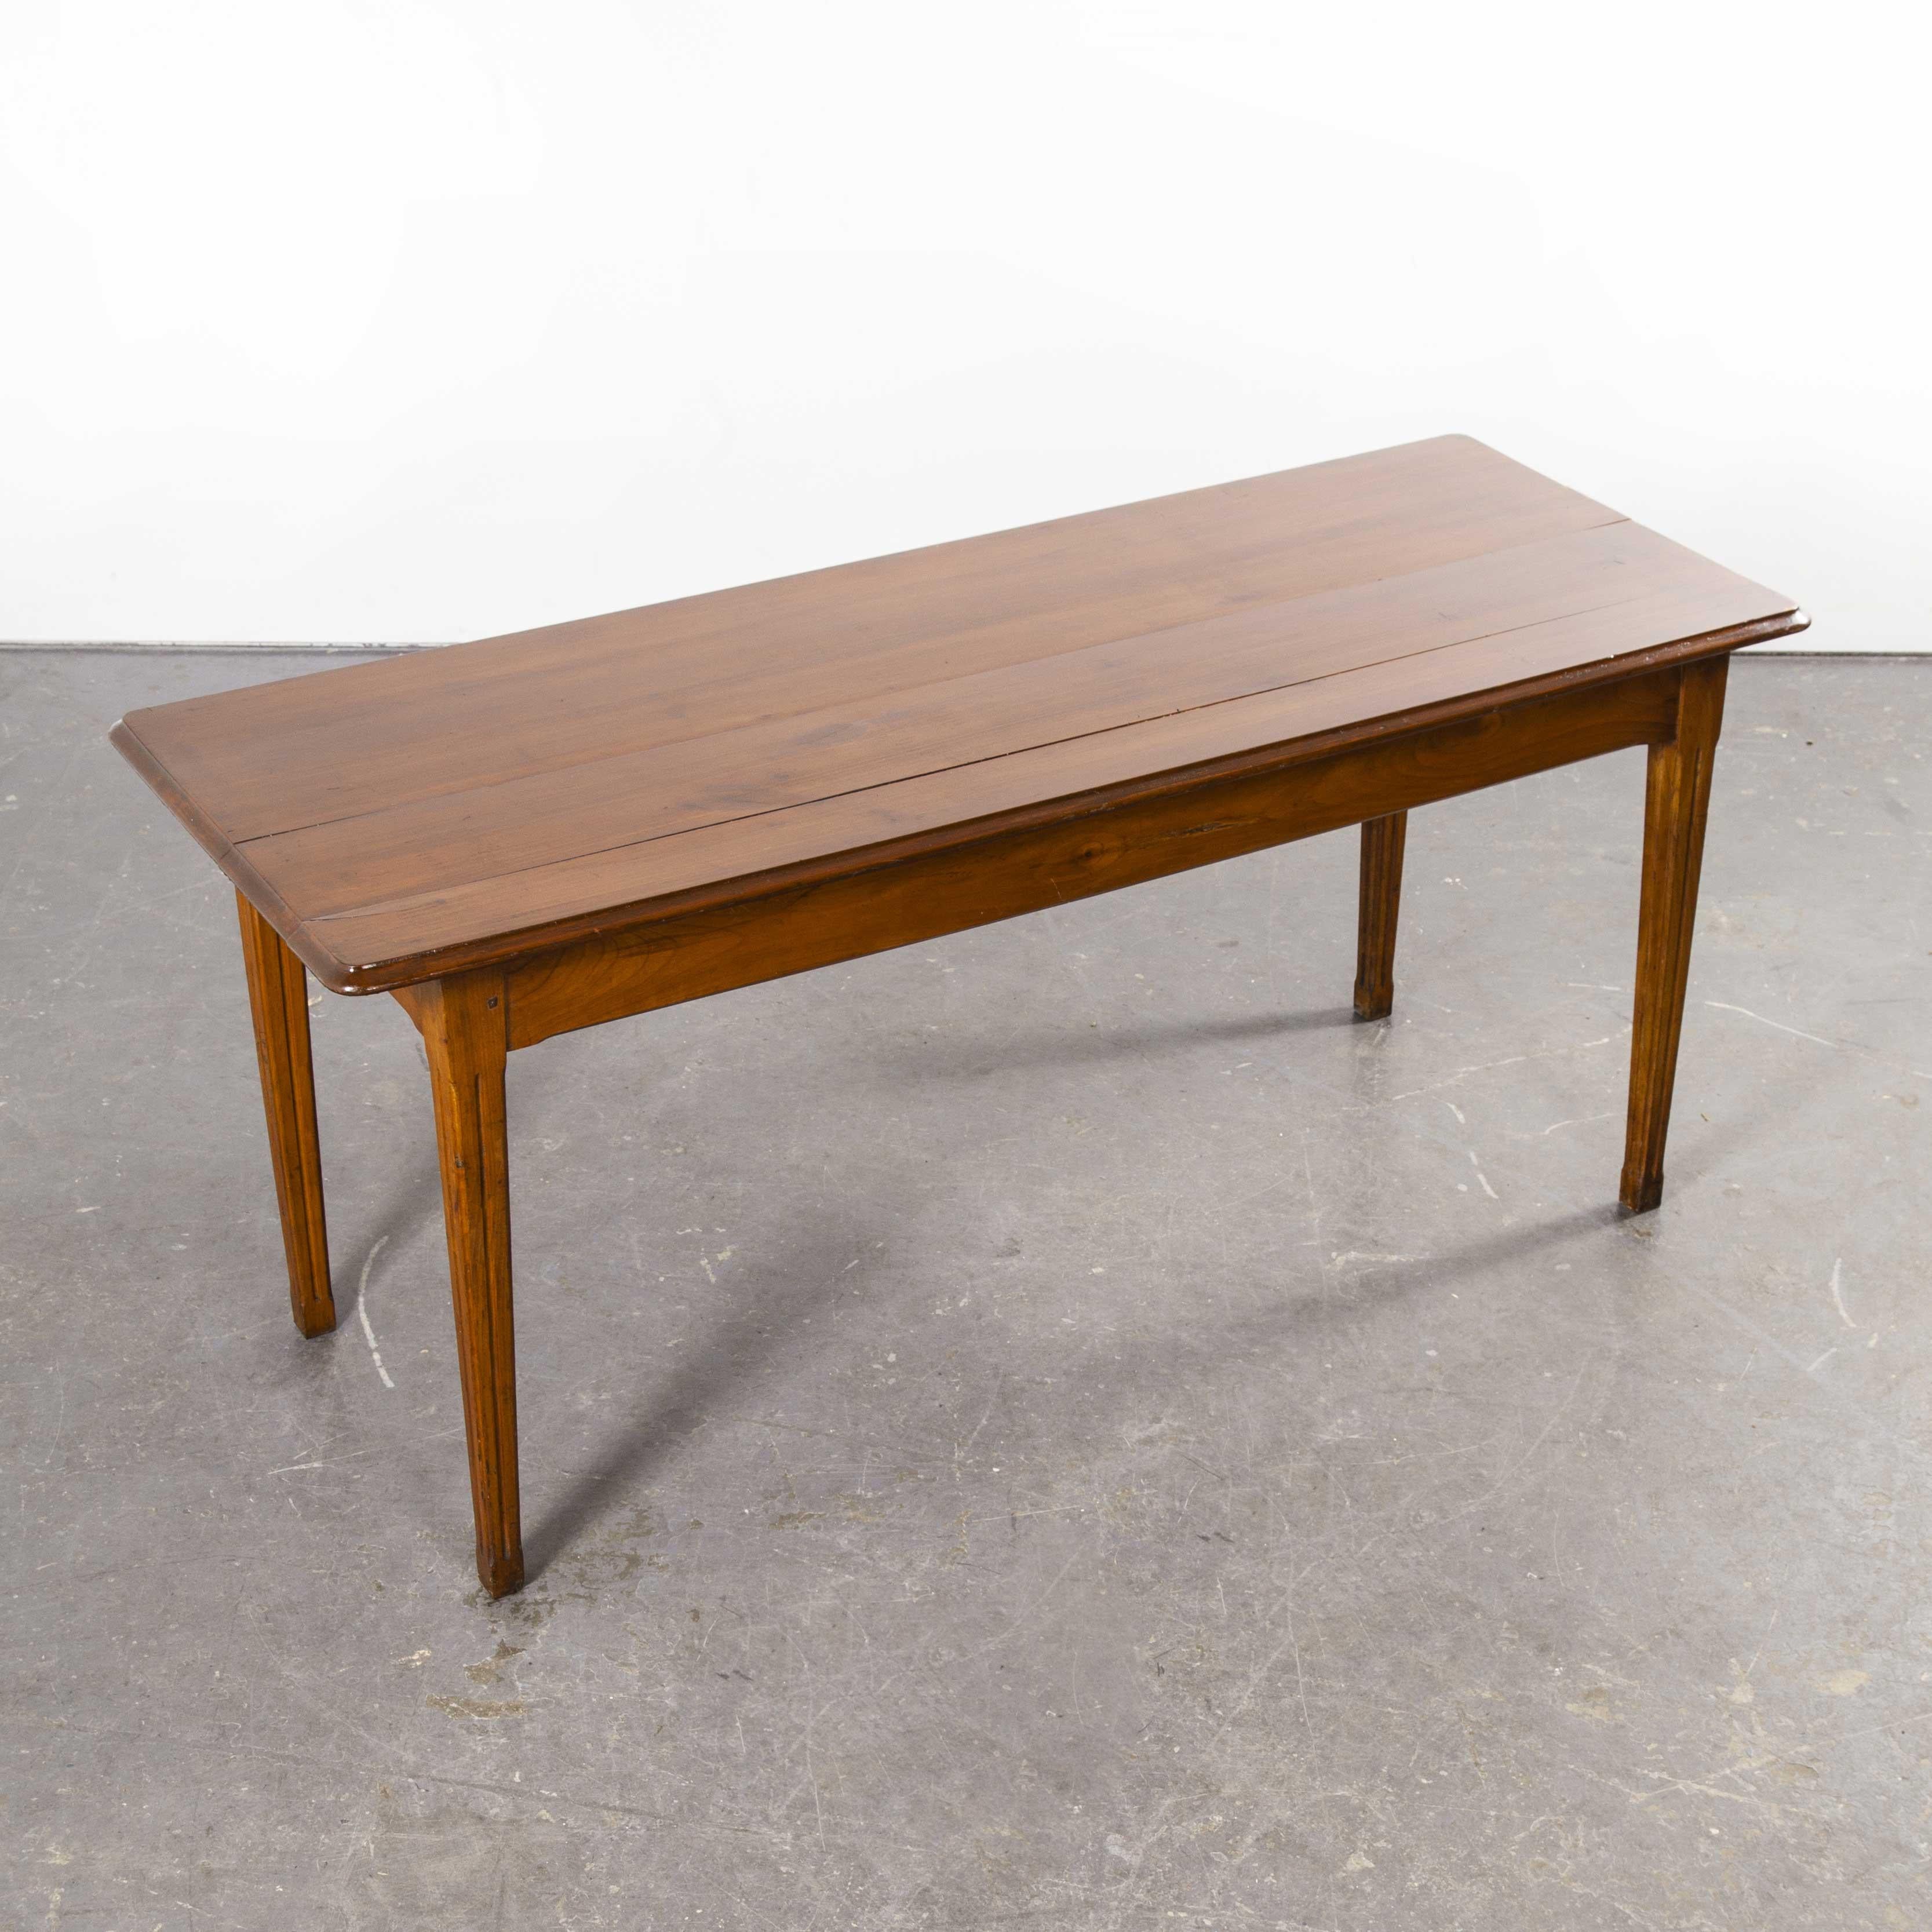 Mid-20th Century 1950s French Pear Wood Rectangular Dining Table 'Model 3'